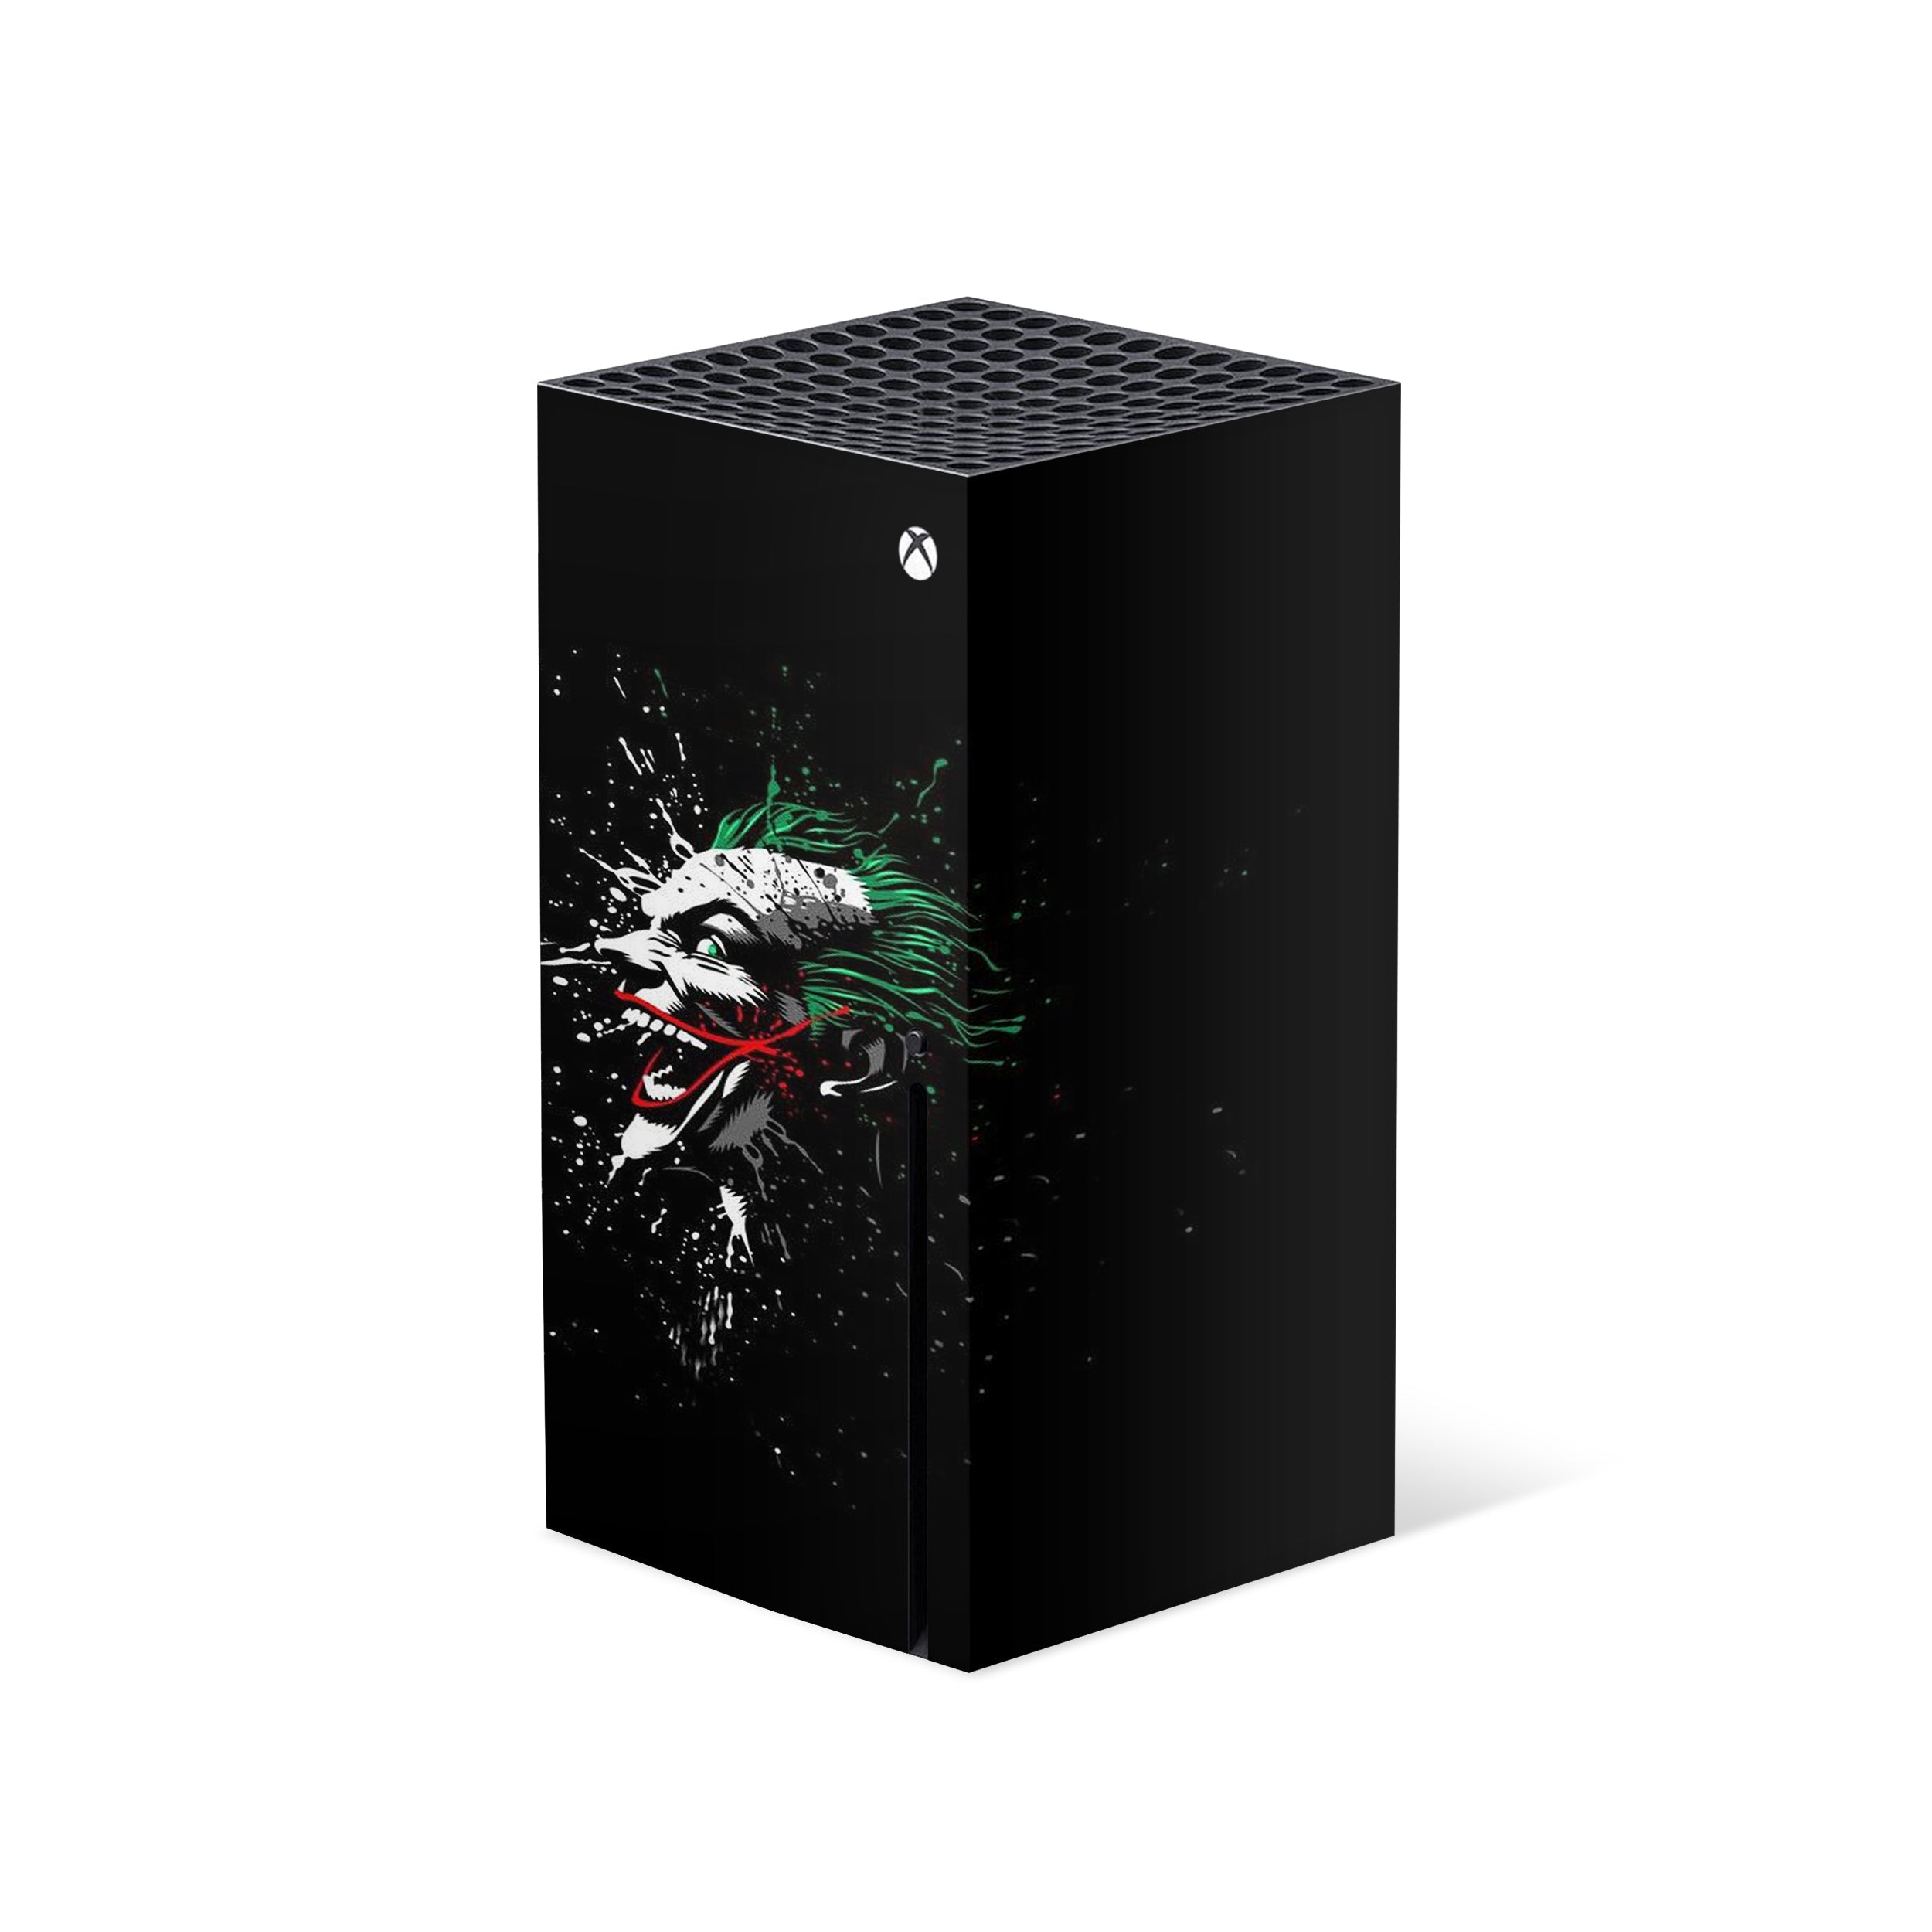 A video game skin featuring a DC Comics Joker design for the Xbox Series X.